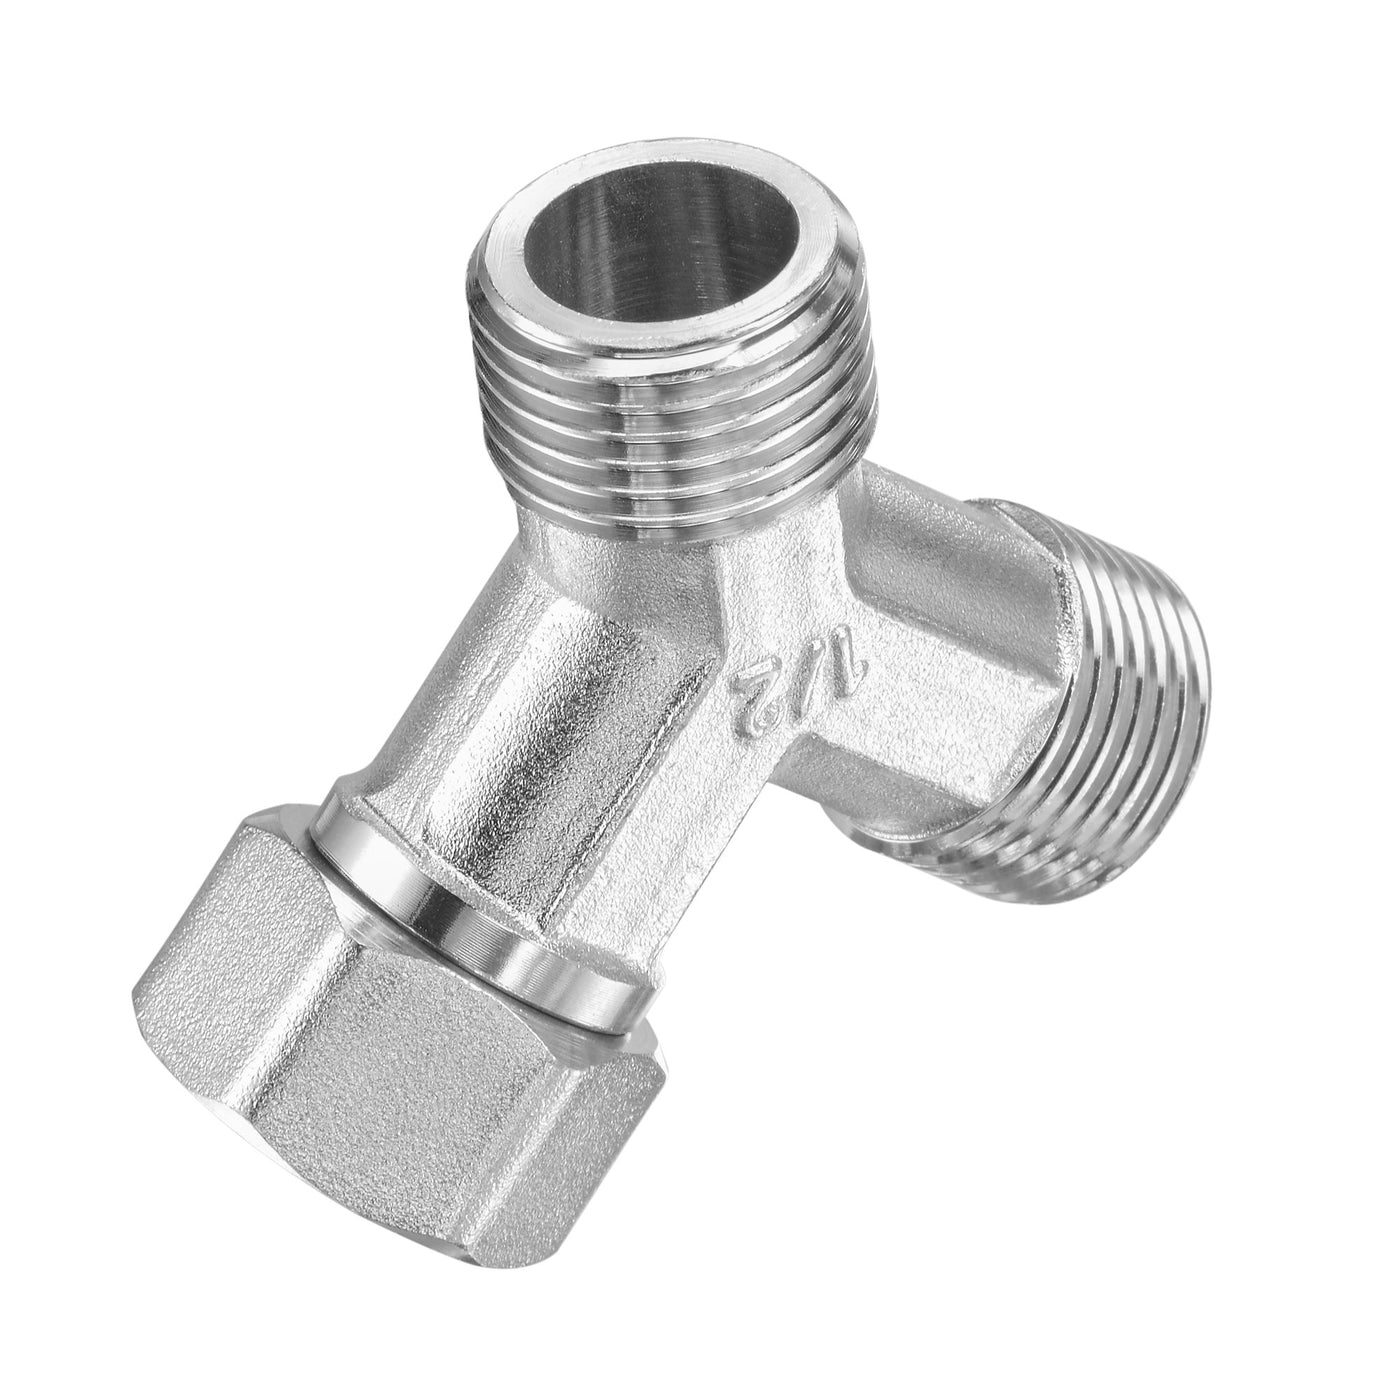 uxcell Uxcell Pipe Fitting G1/2 1 Female to 2 Male Thread Y Shape 3 Ways Wye Hose Connector Adapter, Nickel-Plated Copper